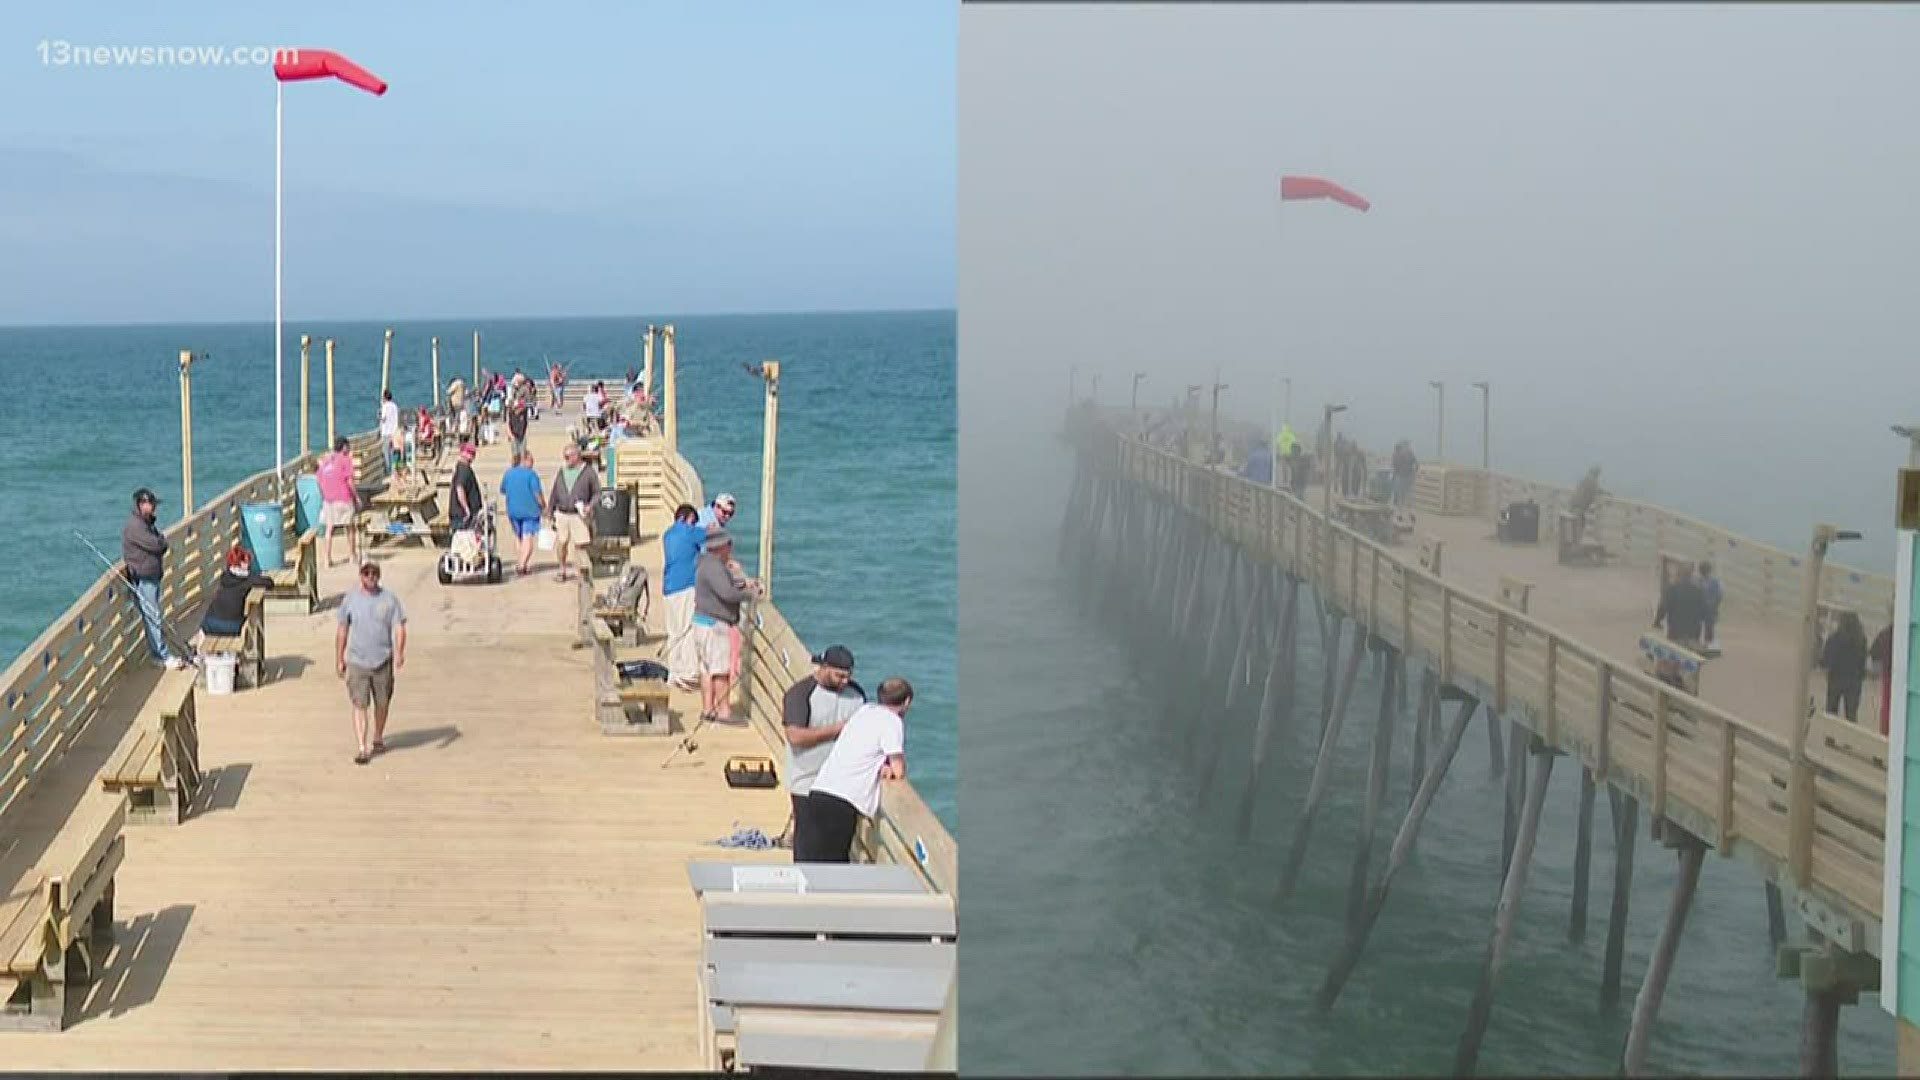 Dare County Emergency Management asked residents and visitors in the Outer Banks to make preparations ahead of Tropical Storm Arthur.